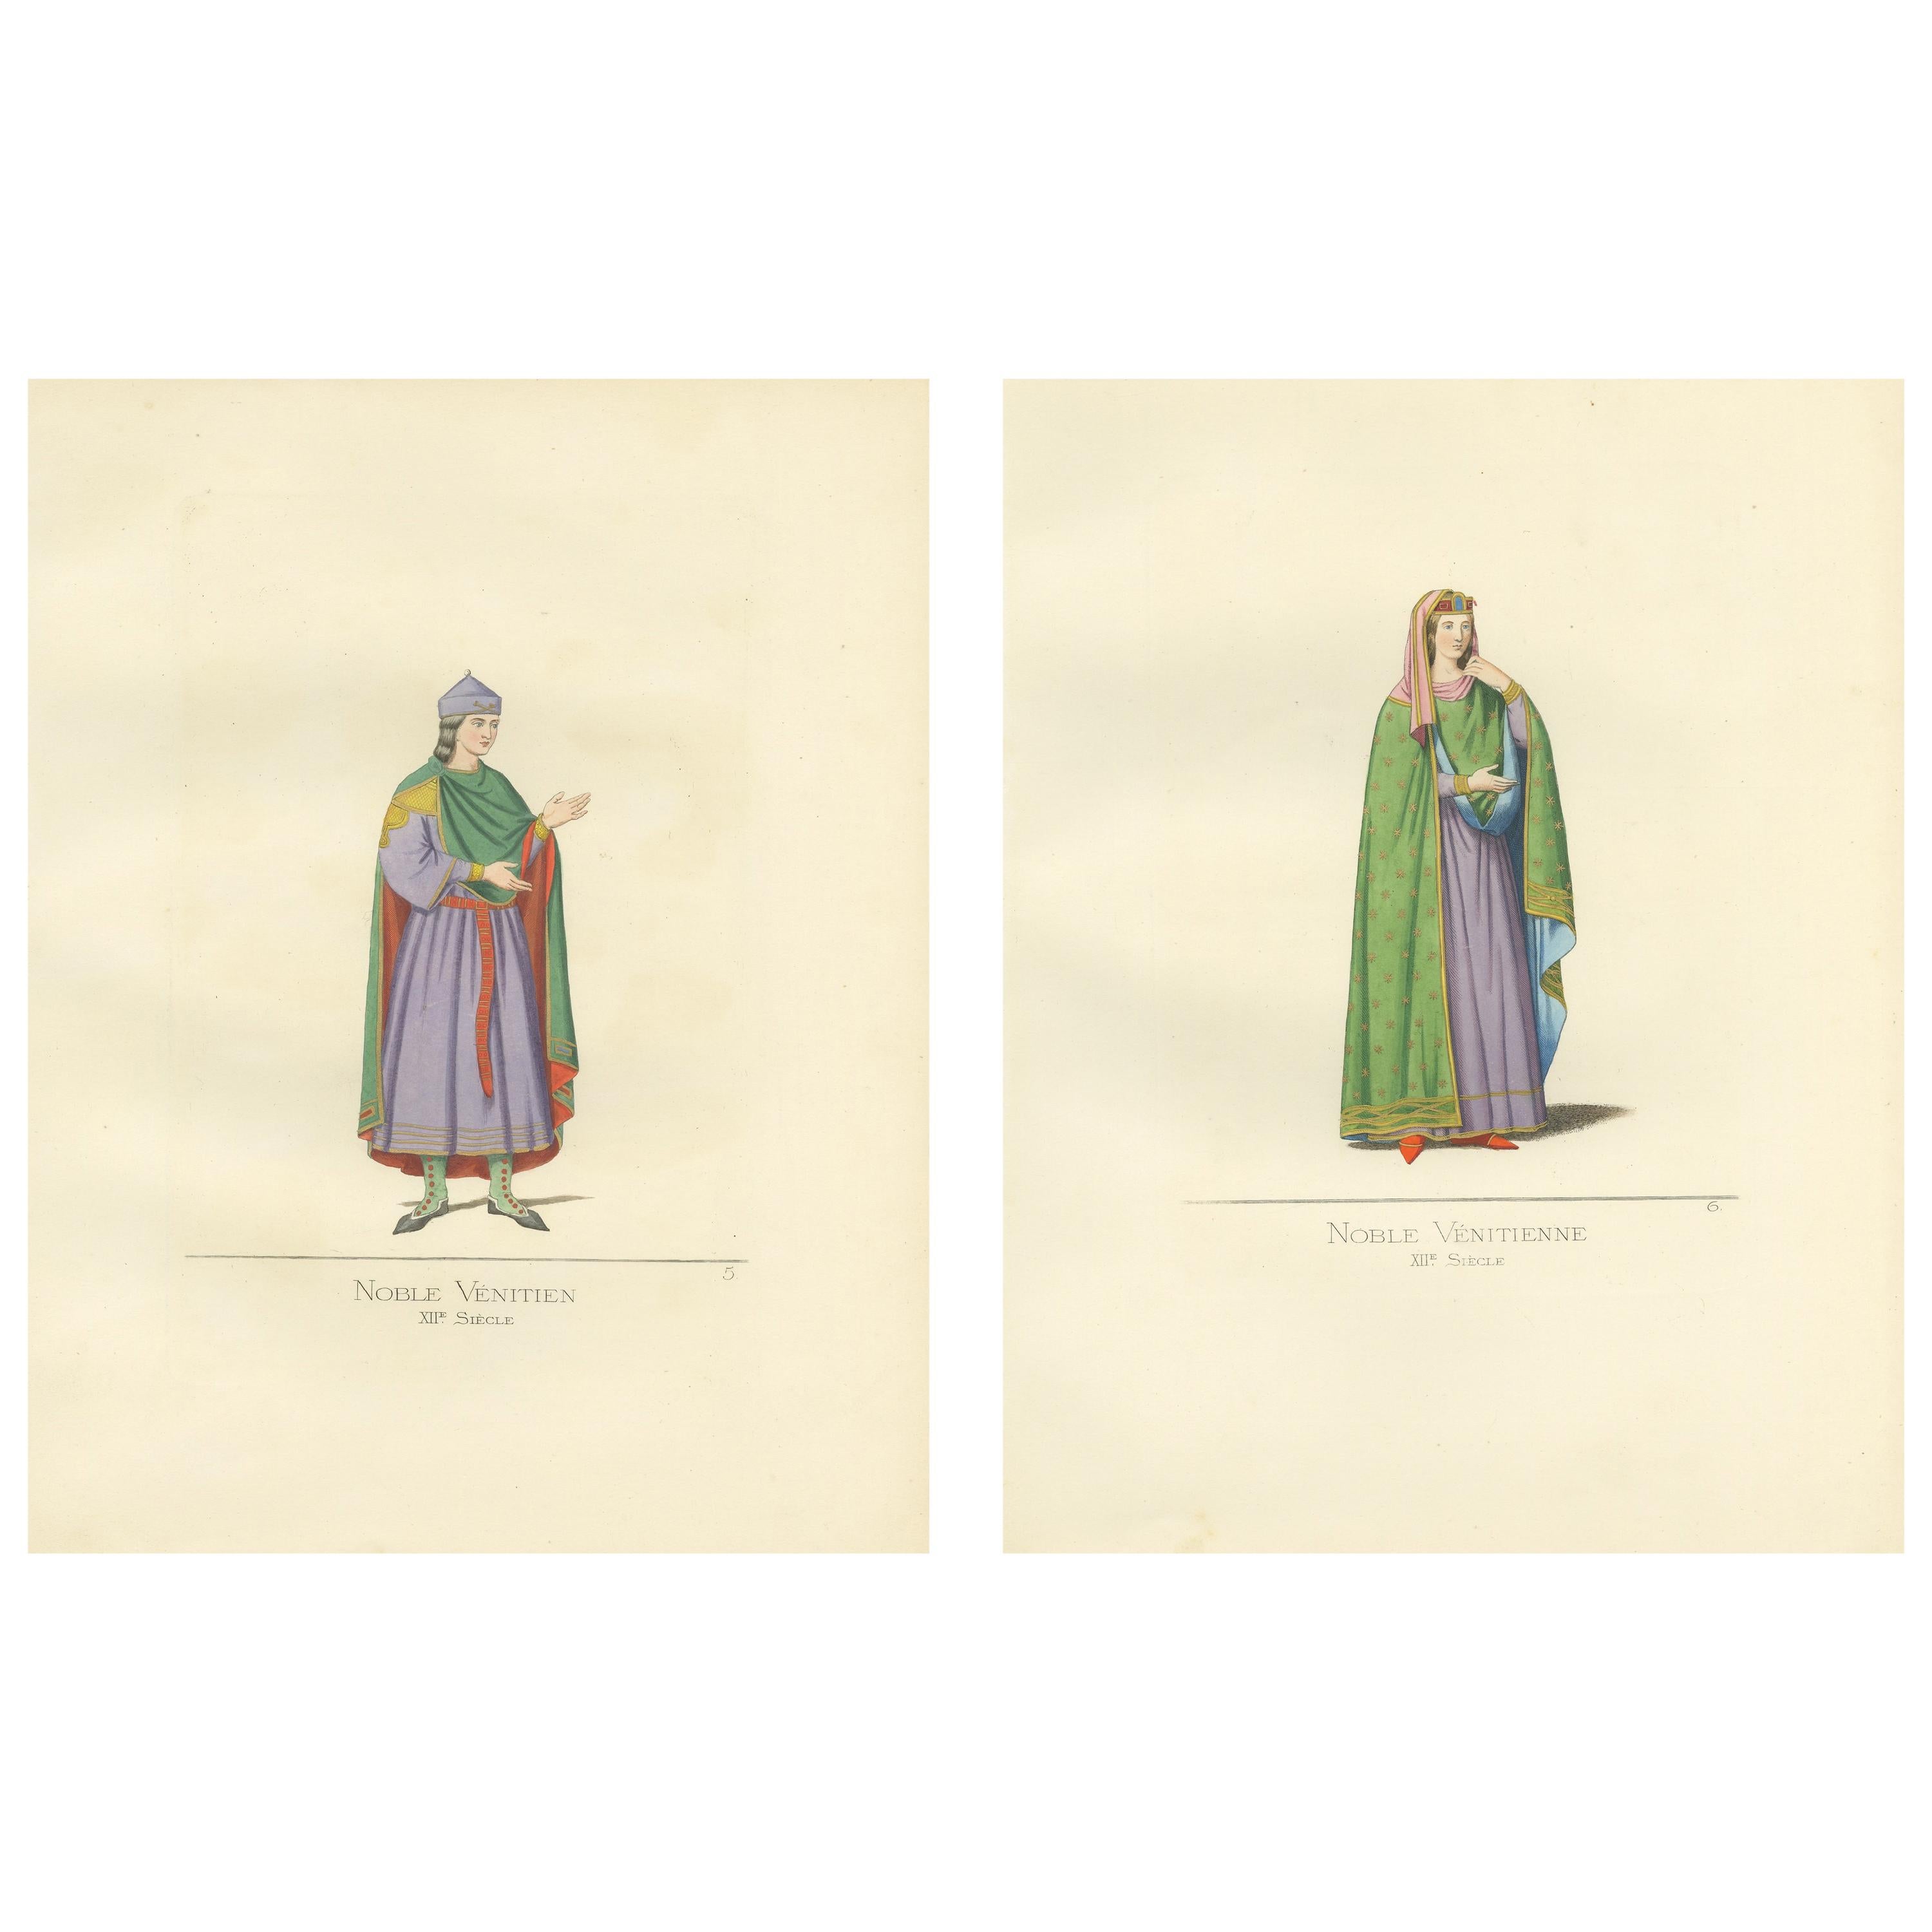 Set of 2 Antique Prints of a Nobleman and Noblewoman of Venice by Bonnard, 1860